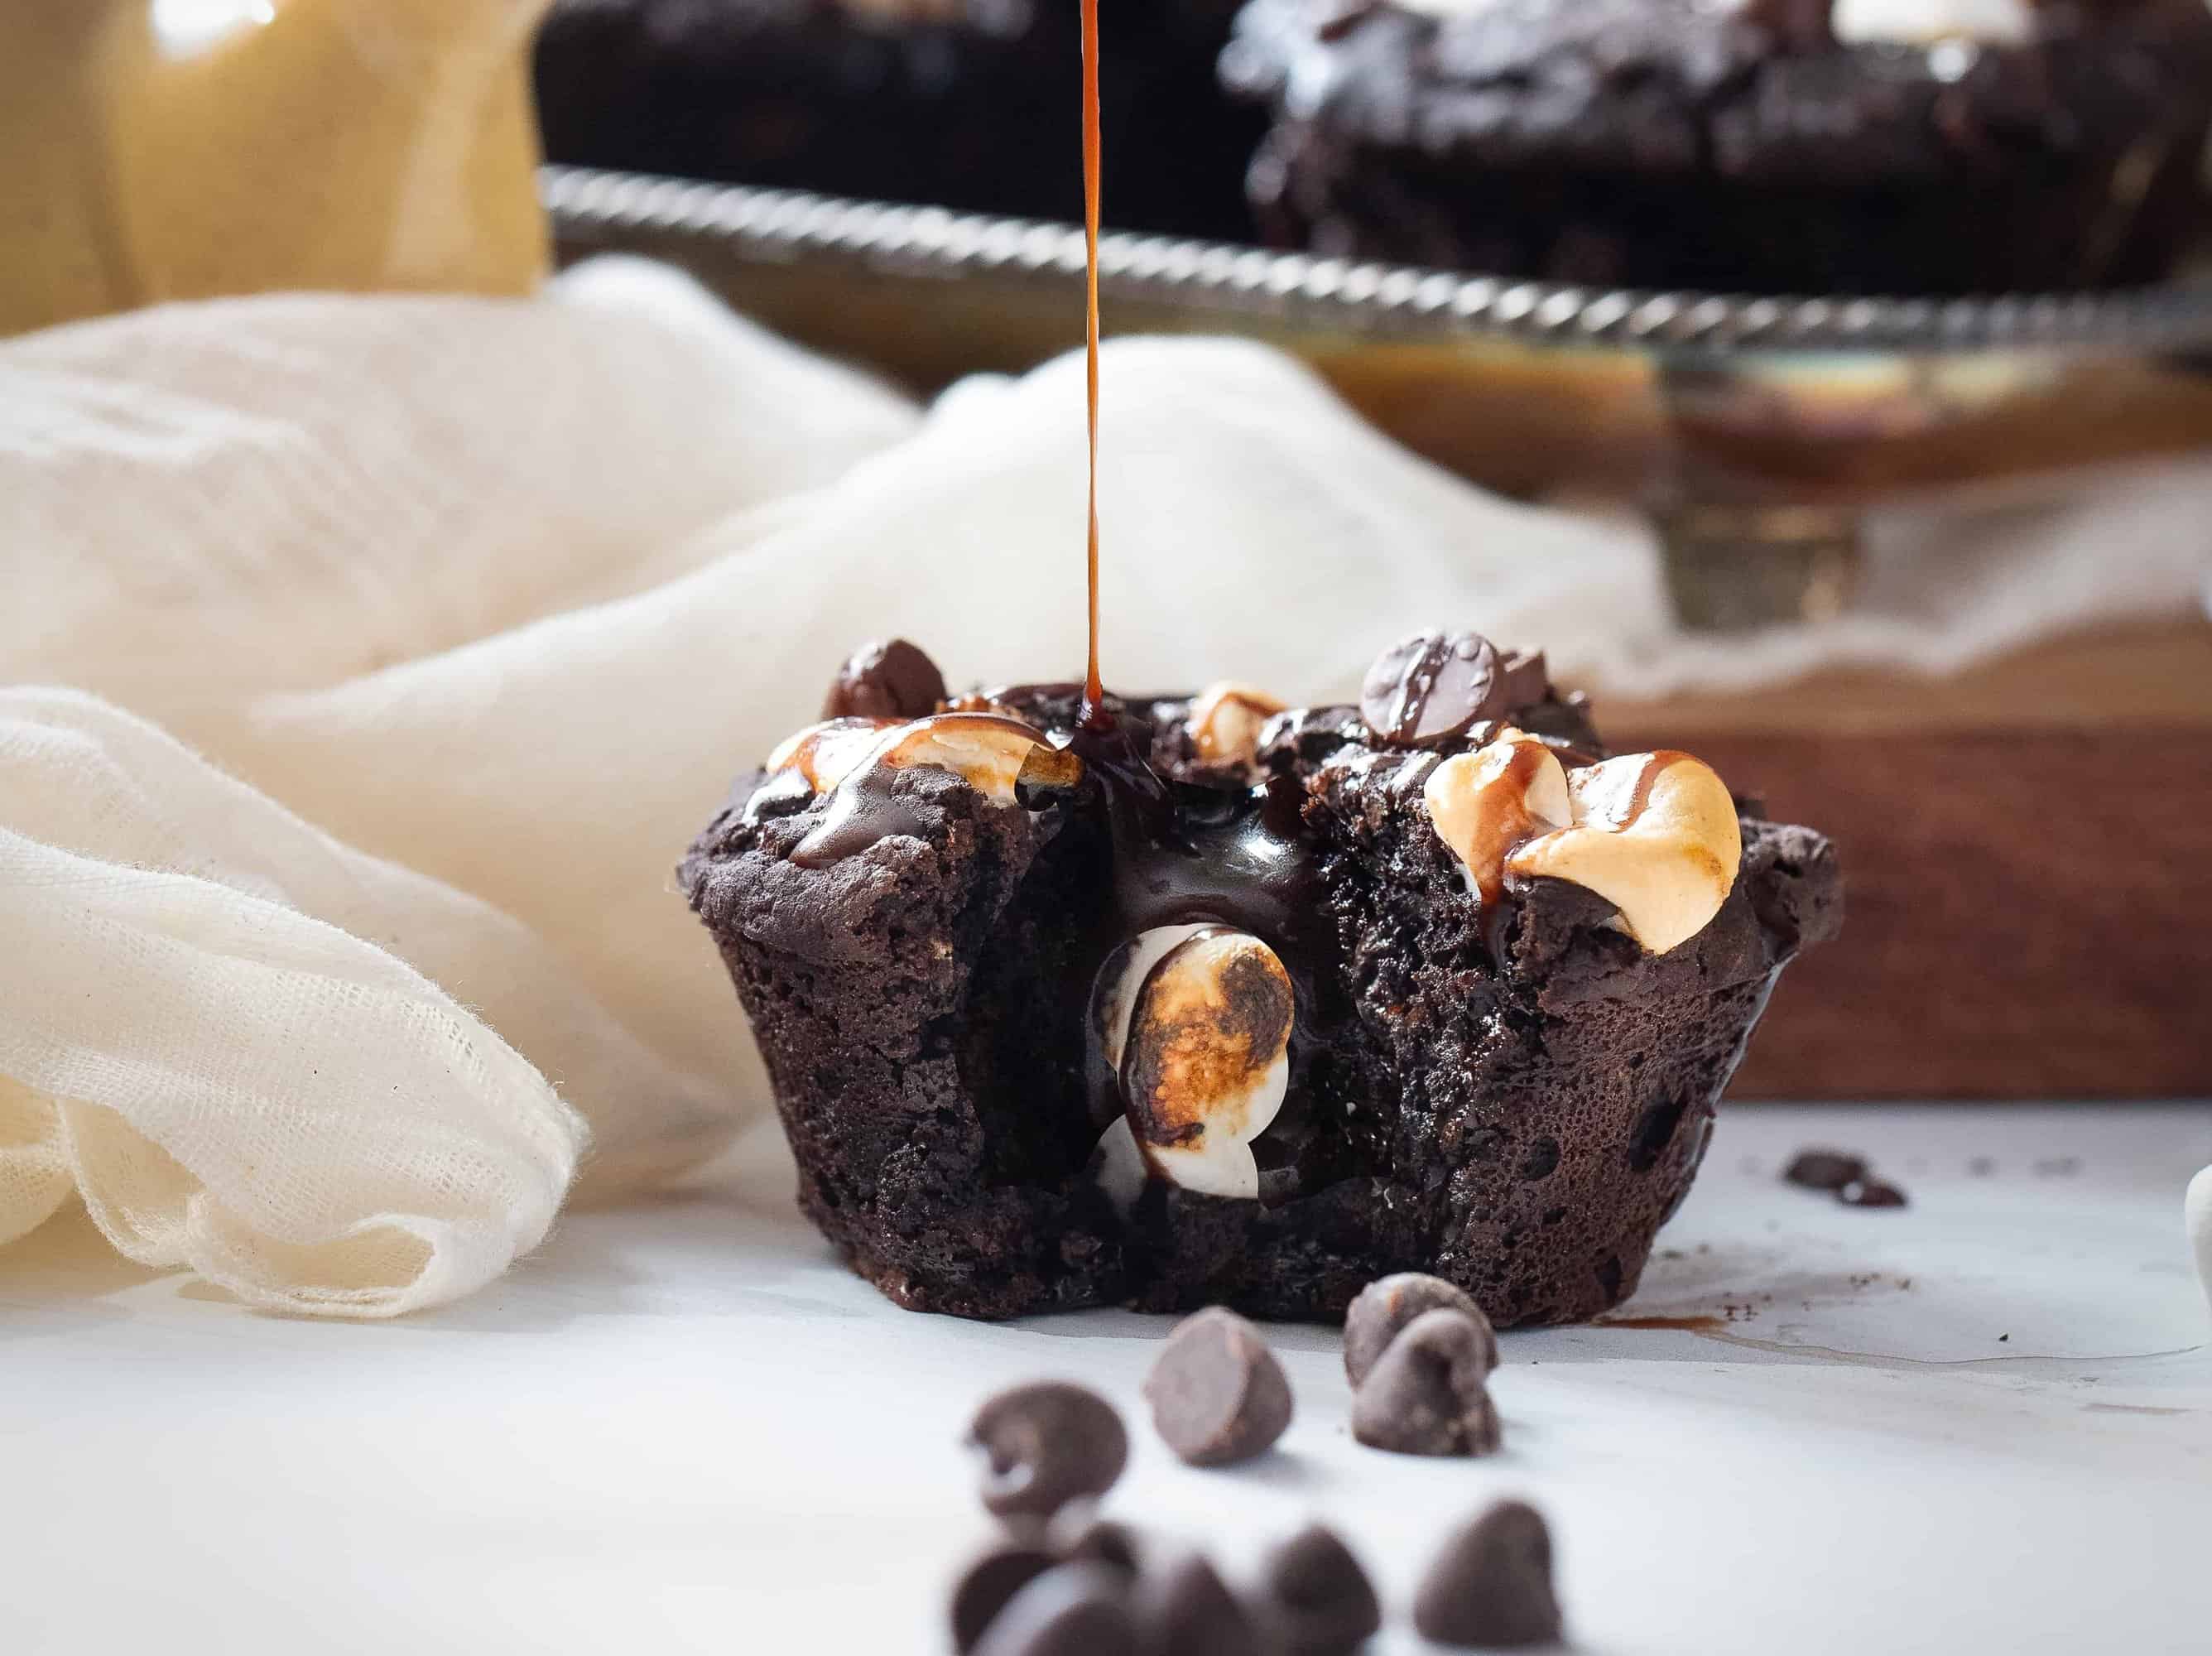 S'more muffin being drizzled with chocolate